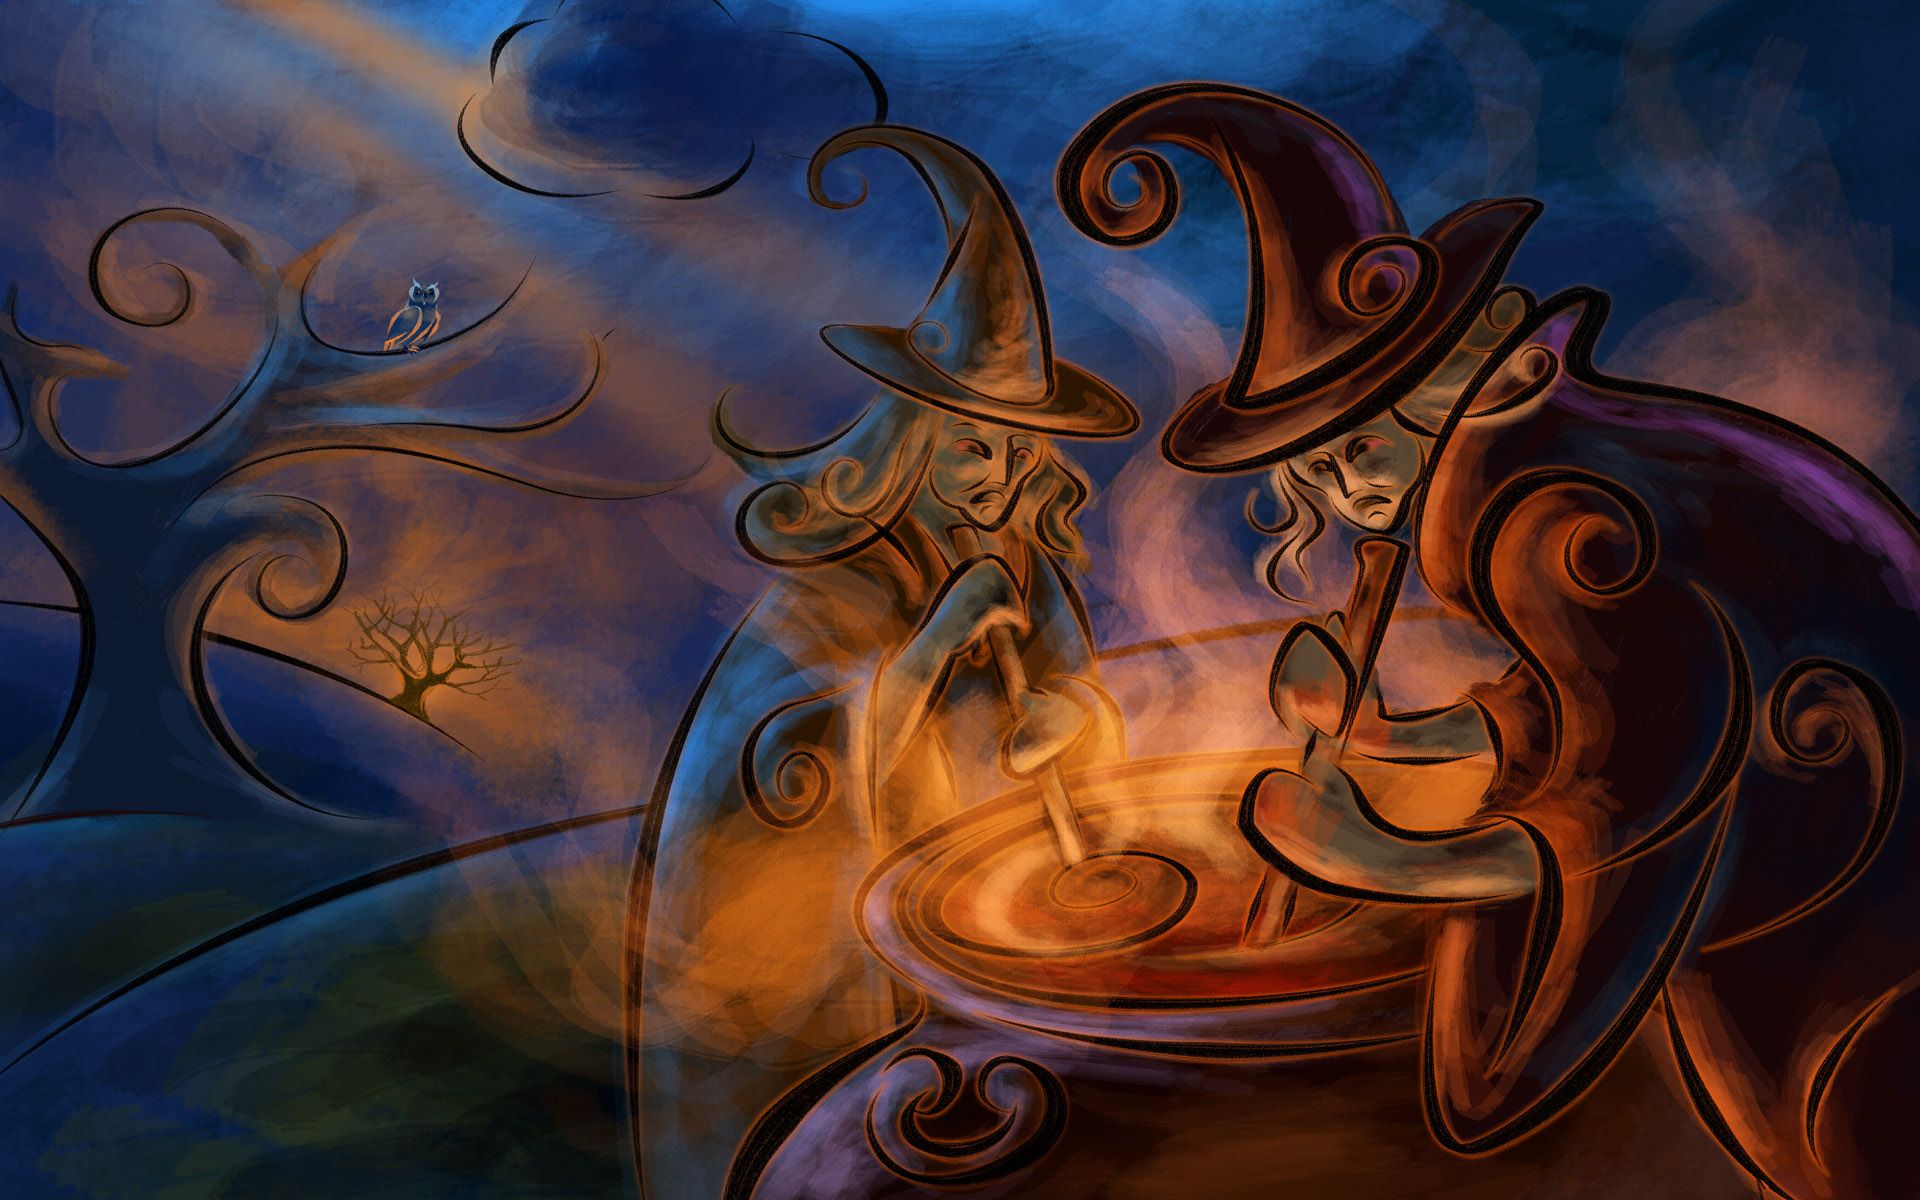 Halloween Witches picture art illustration Wallpaper Wallpaper 70480